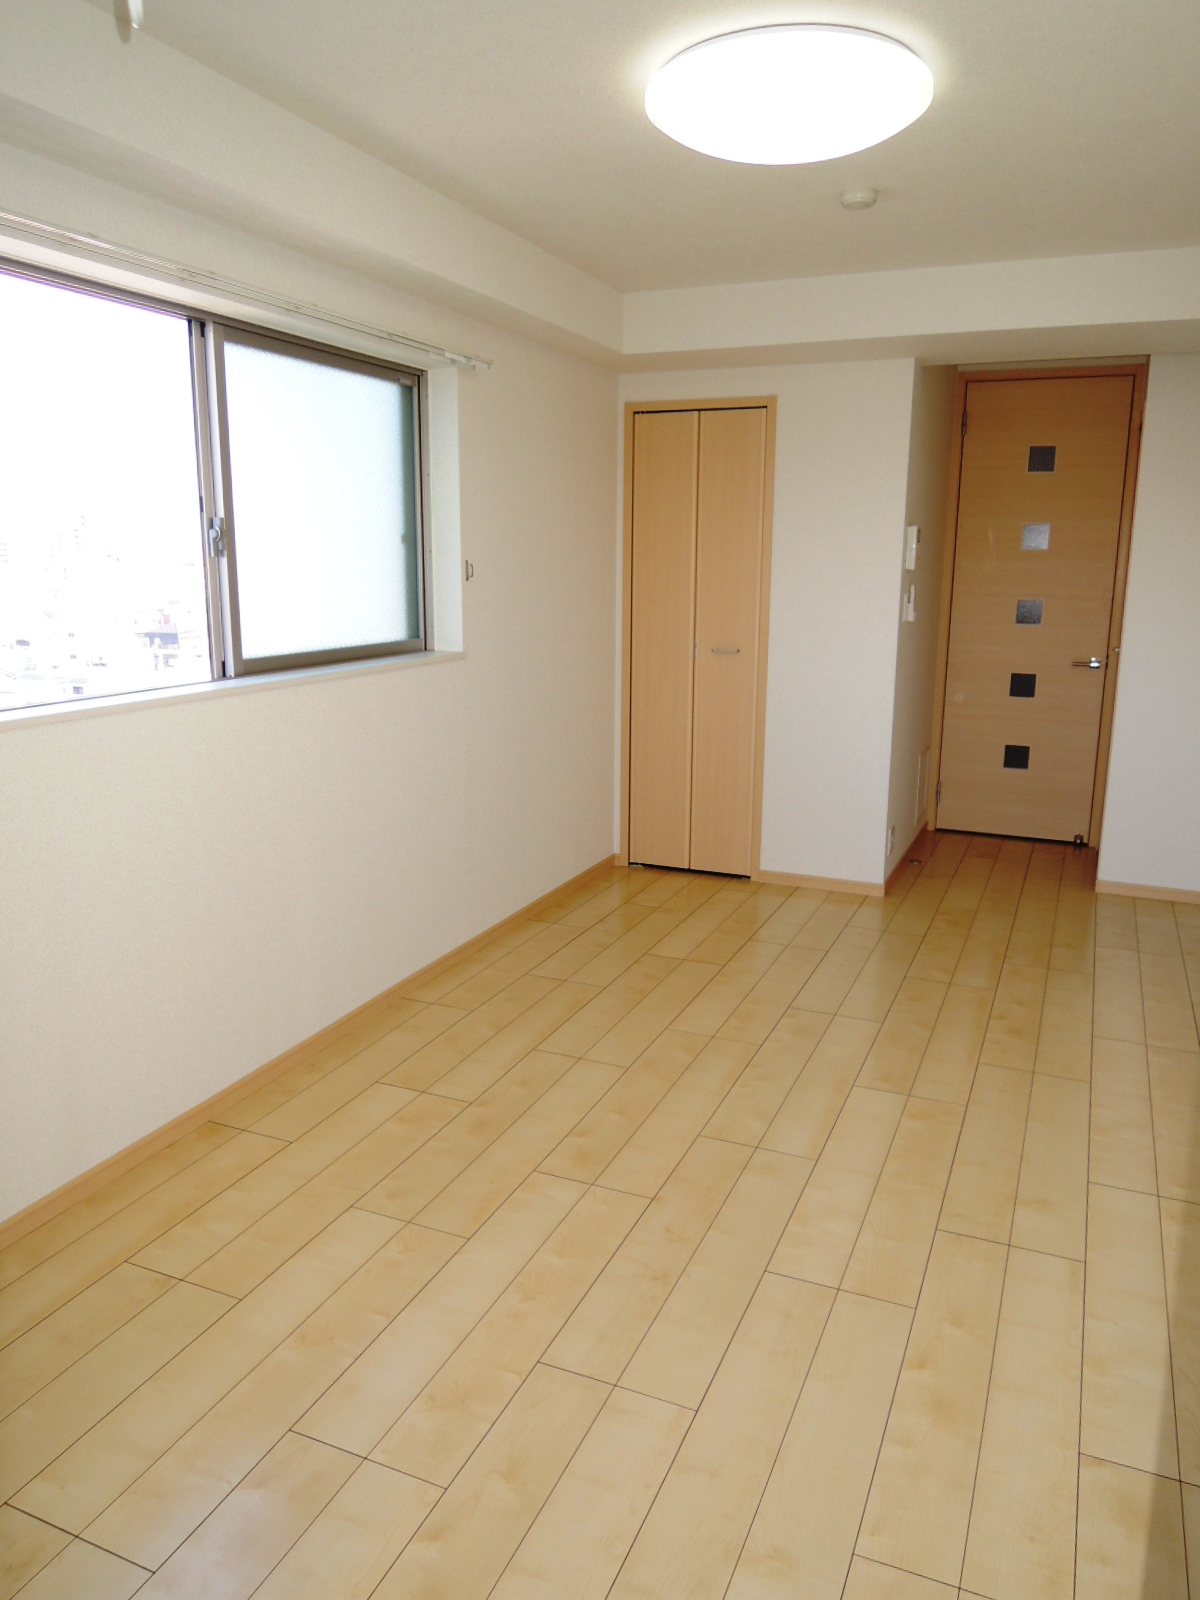 Living and room. There is a window bright spacious and bright Western-style